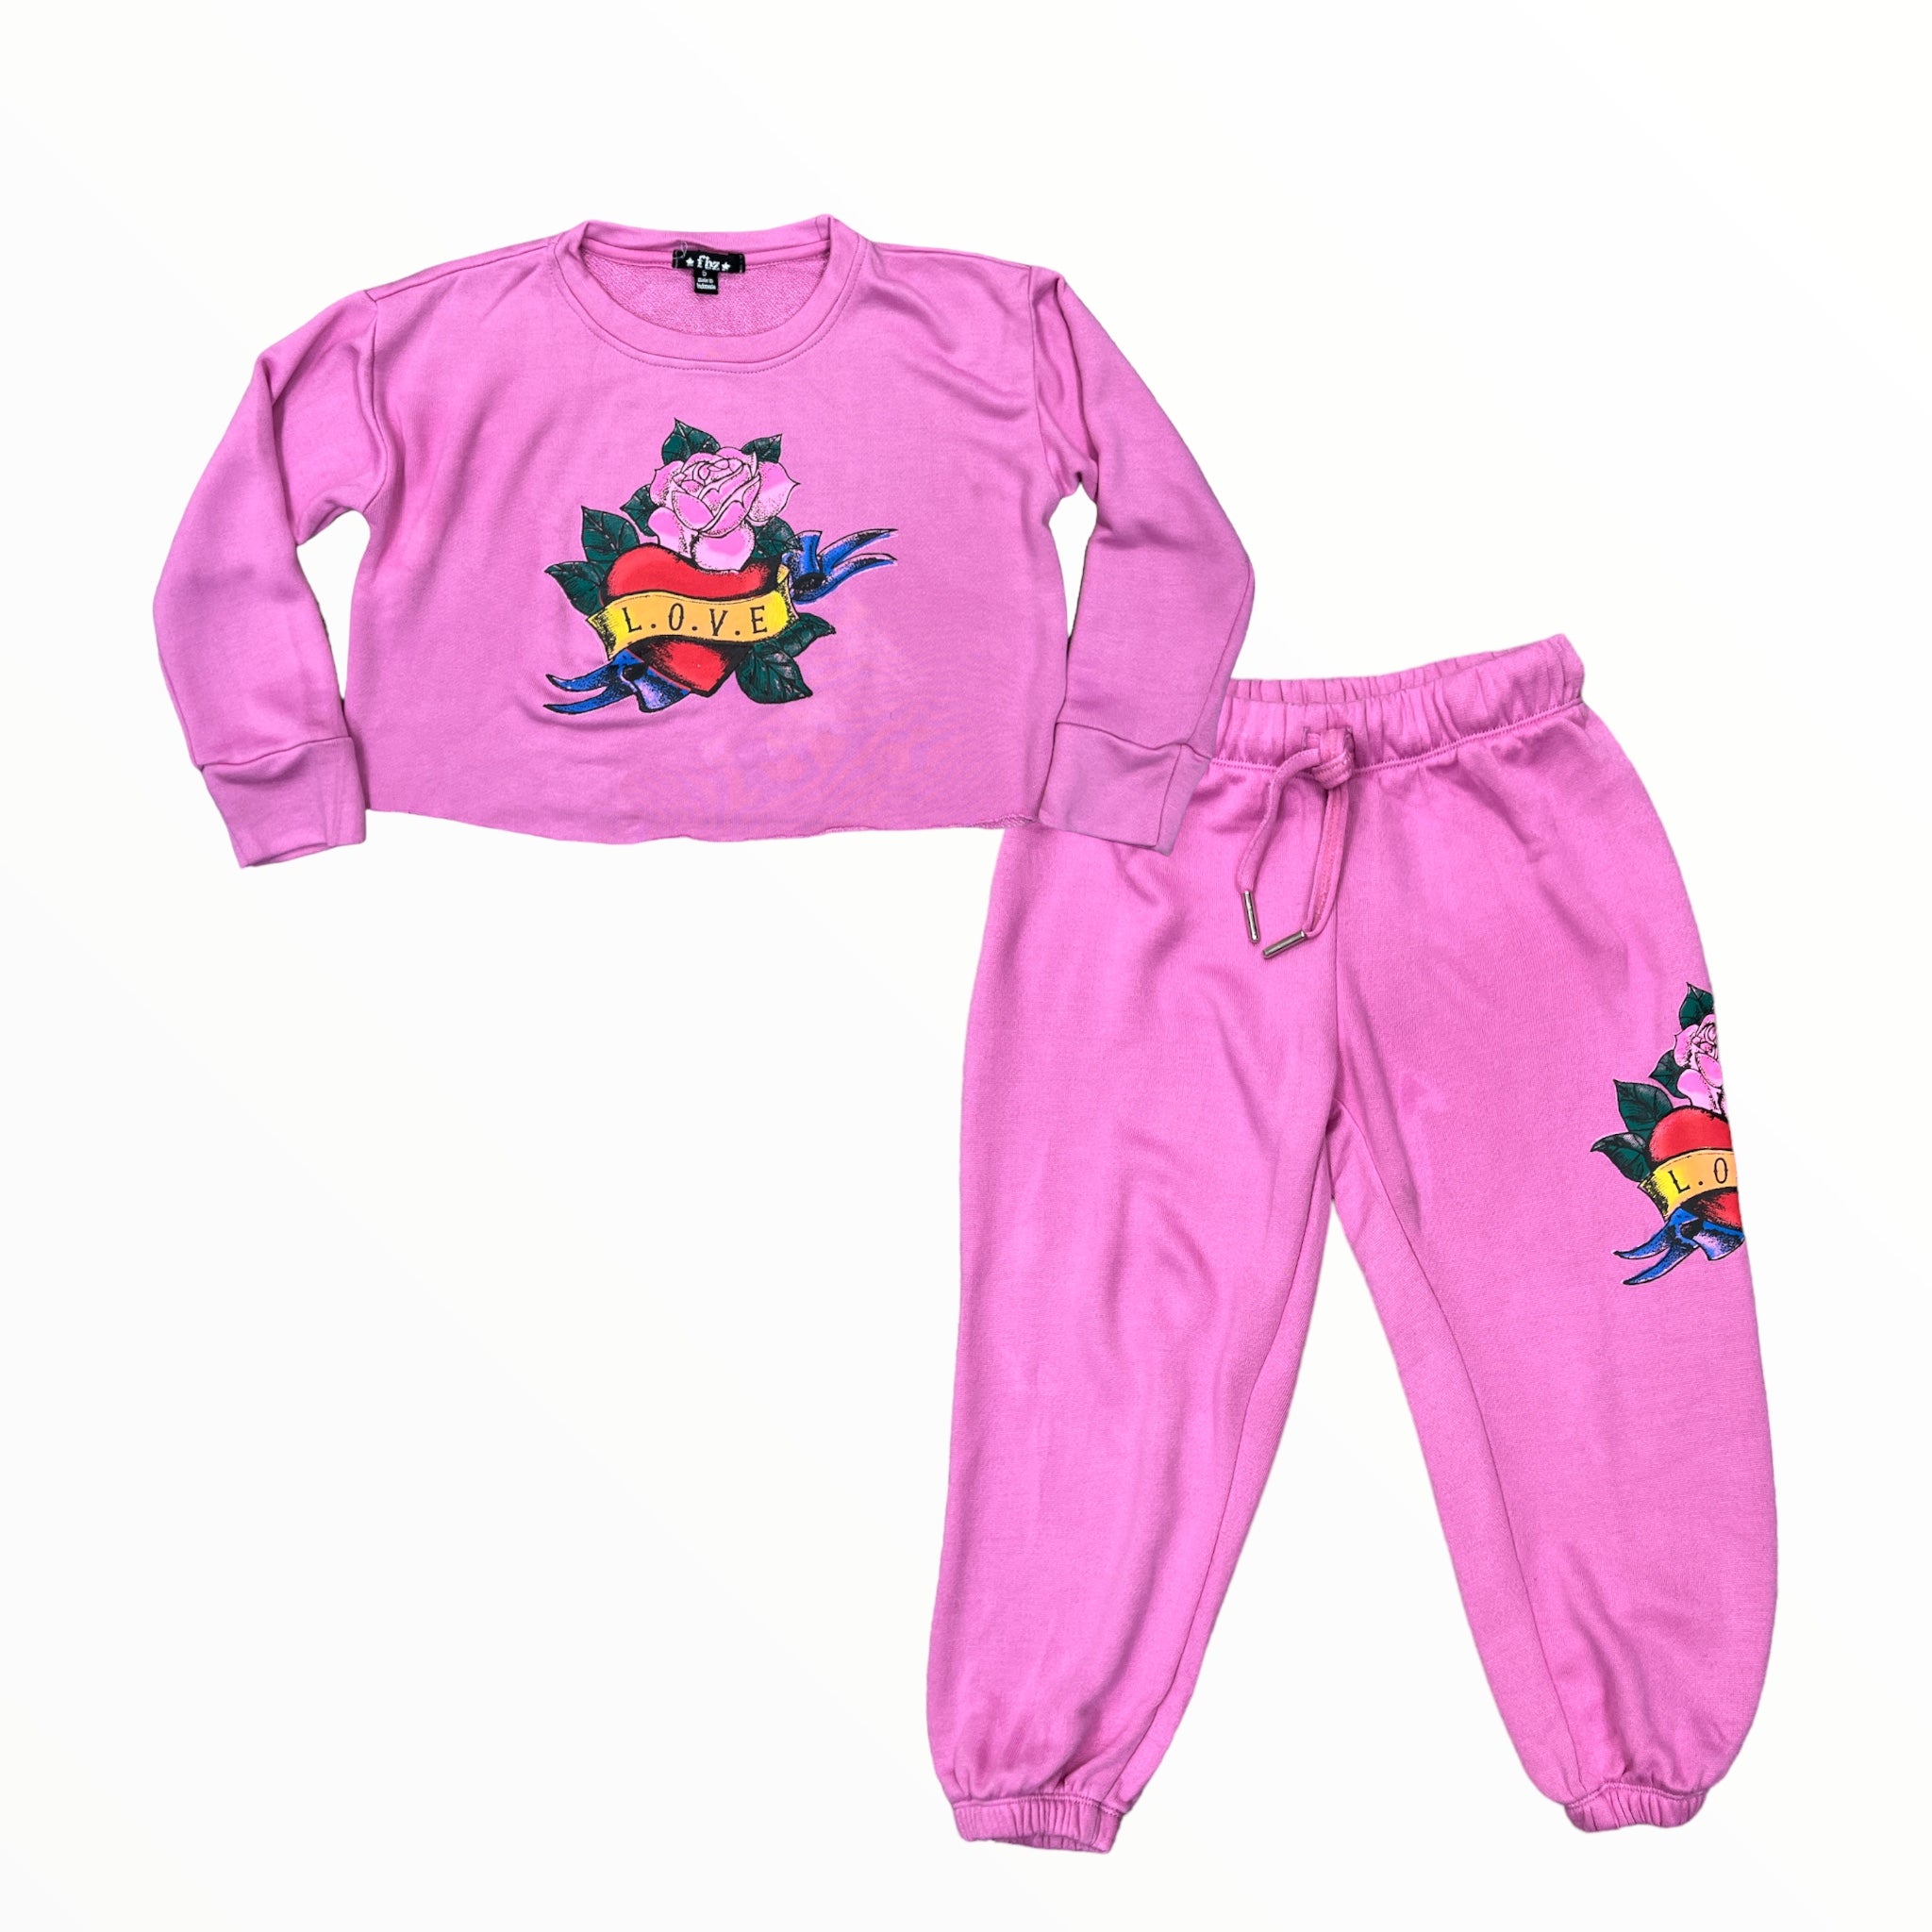 FLOWERS BY ZOE CROP PULLOVER - PINK/LOVE ROSE